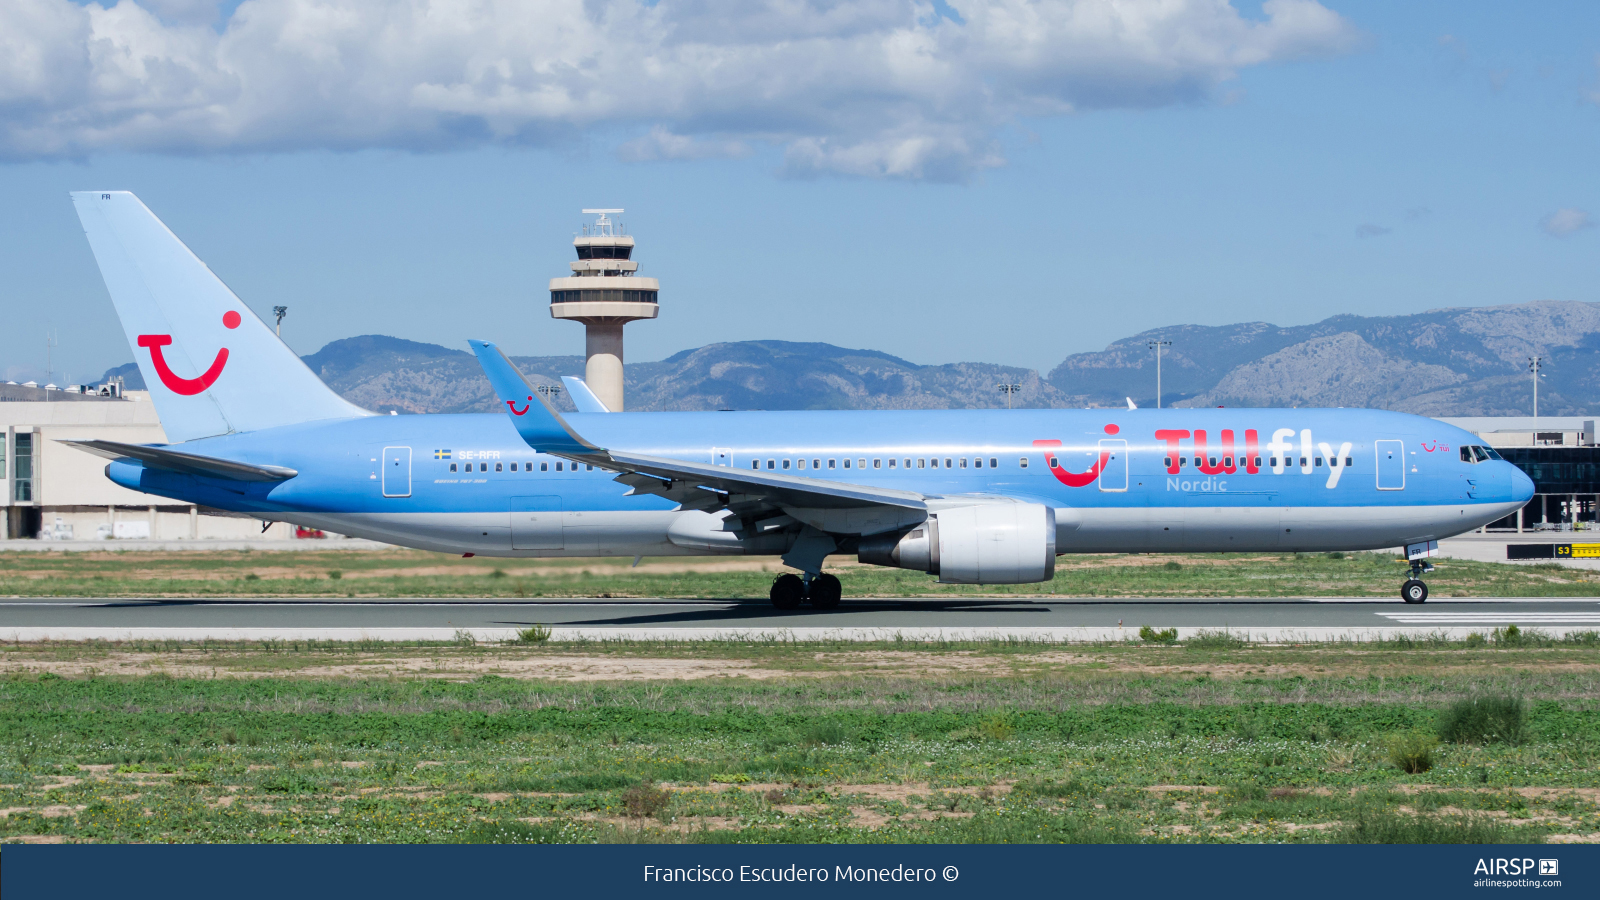 Tui Fly Nordic  Boeing 767-300  SE-RFR